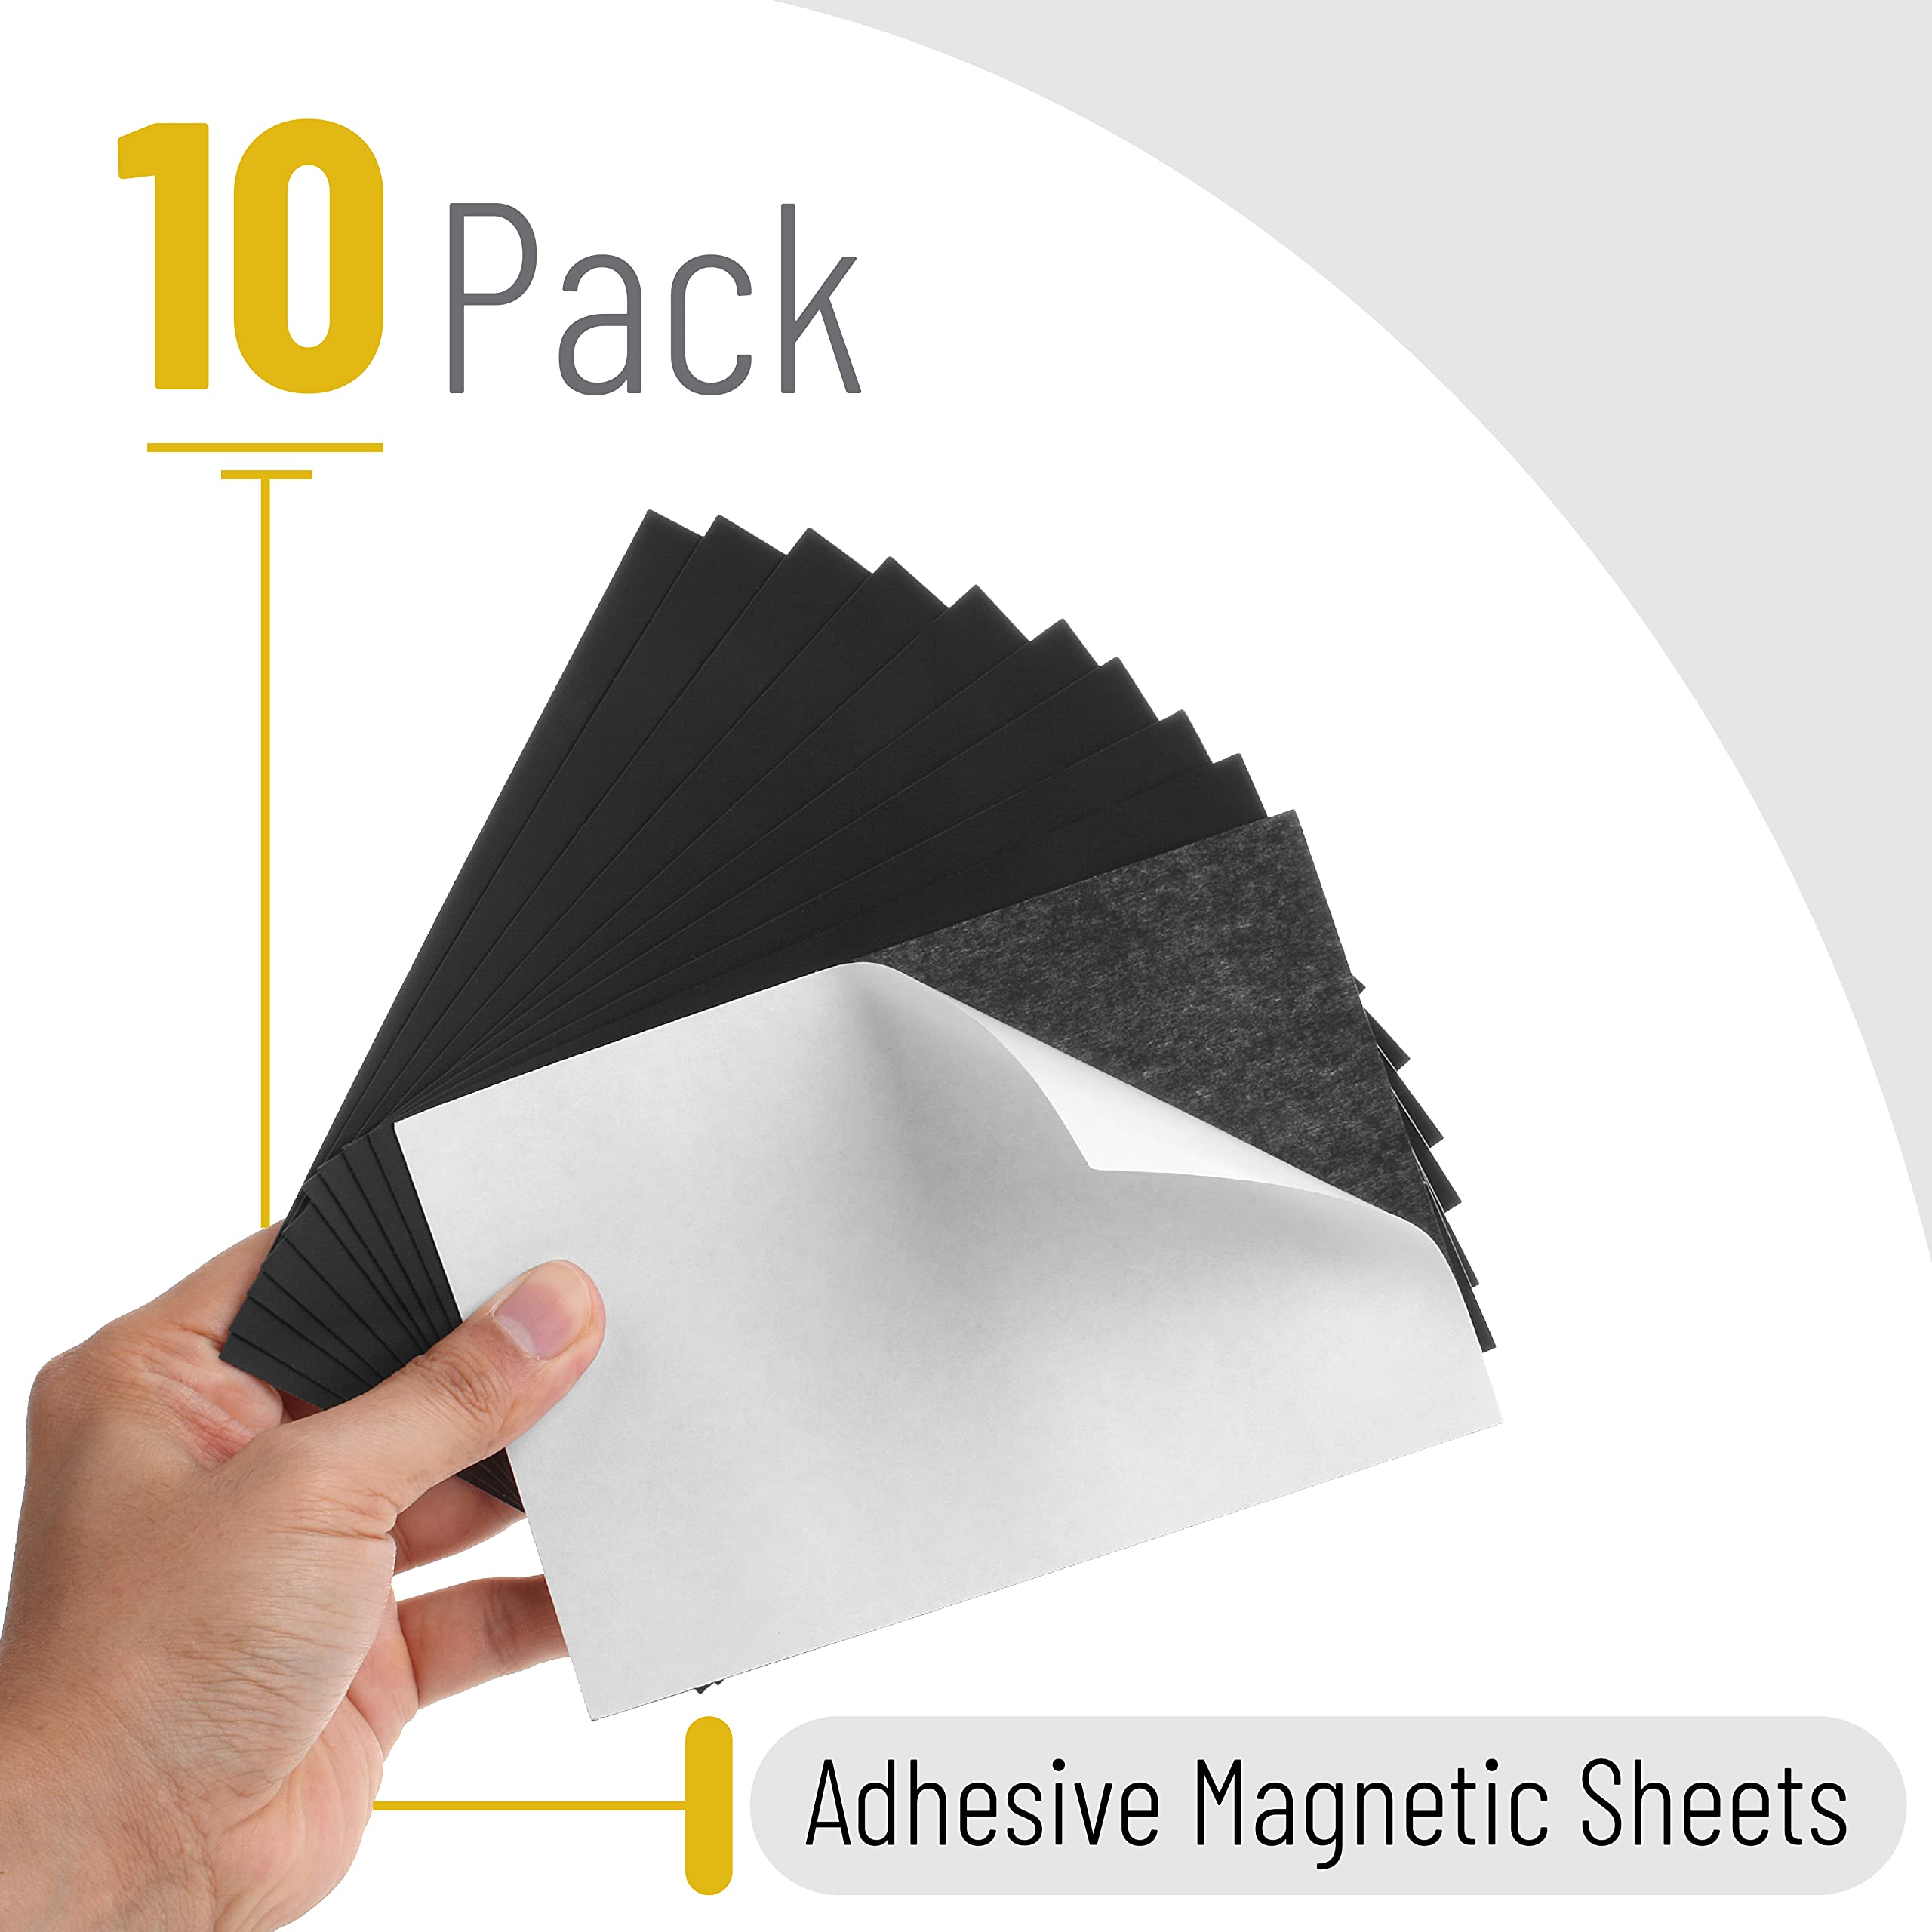 Magnetic Sheets with Adhesive Backing: 4 x 6 inch – Canopus USA